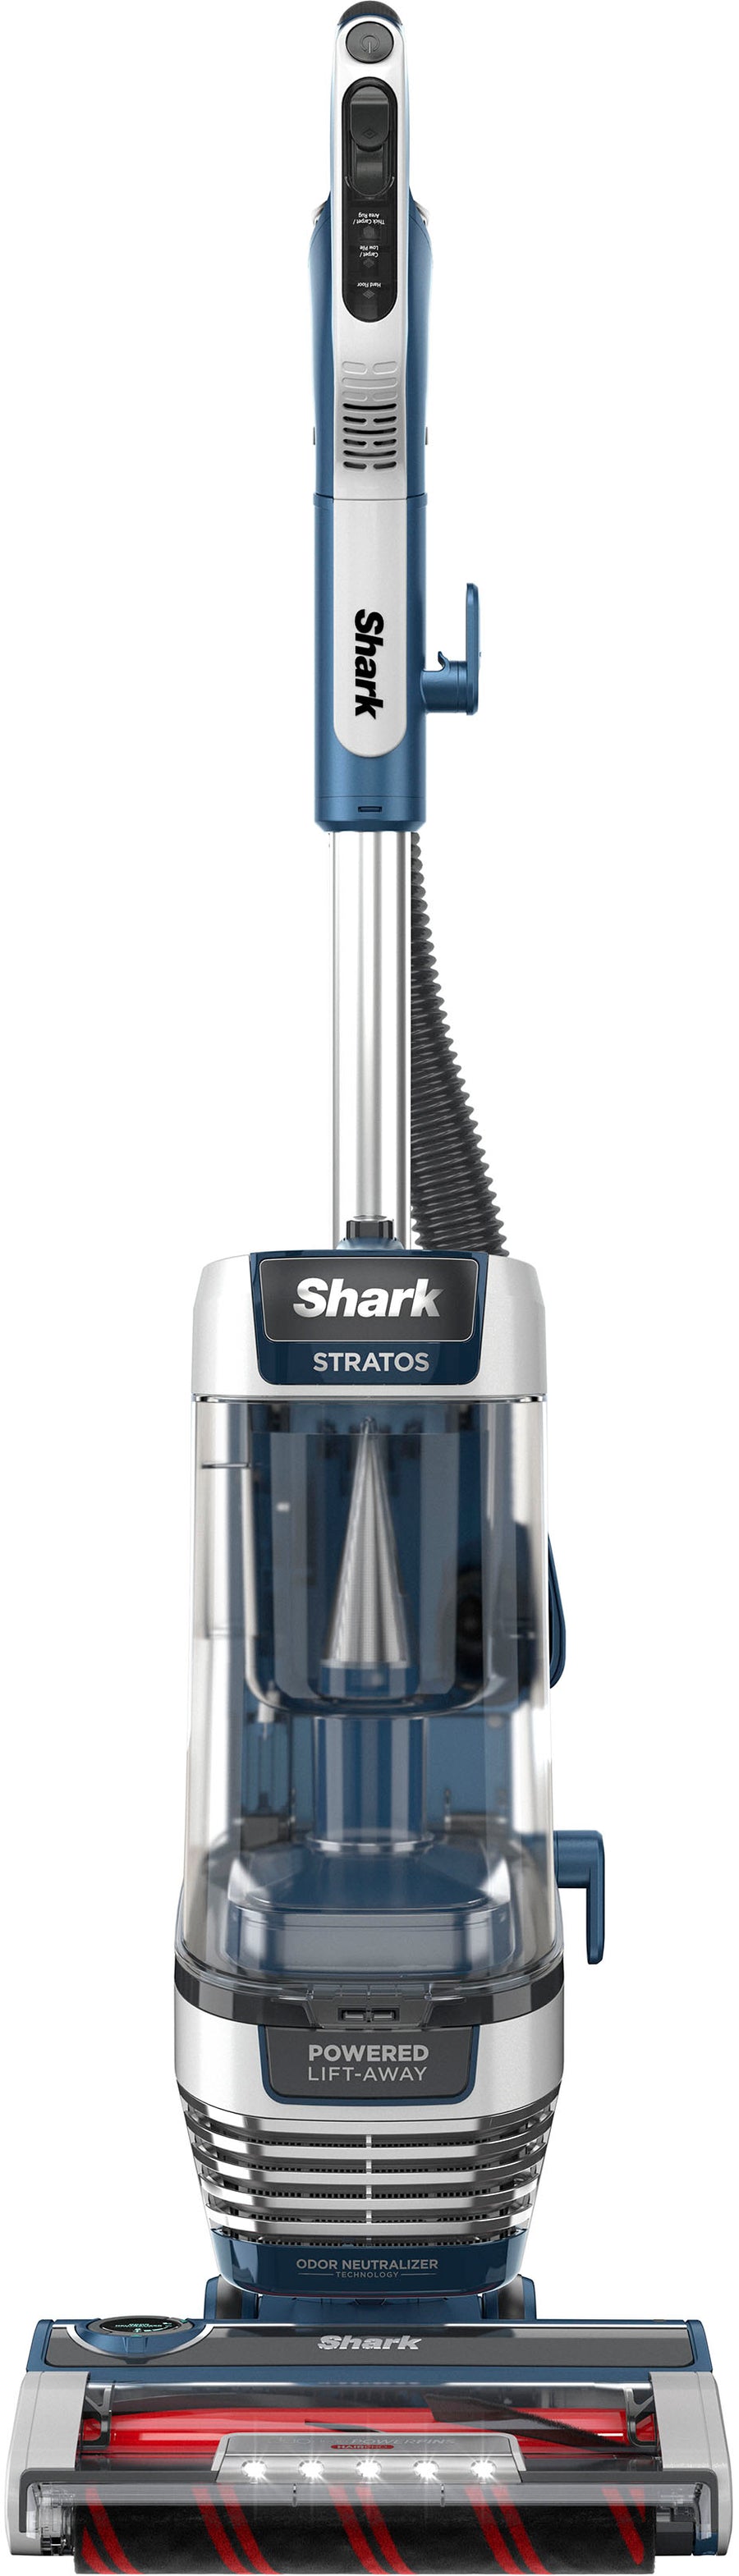 Shark - Stratos Upright Vacuum with DuoClean PowerFins HairPro, Self-Cleaning Brushroll, Odor Neutralizer Technology - Navy_0